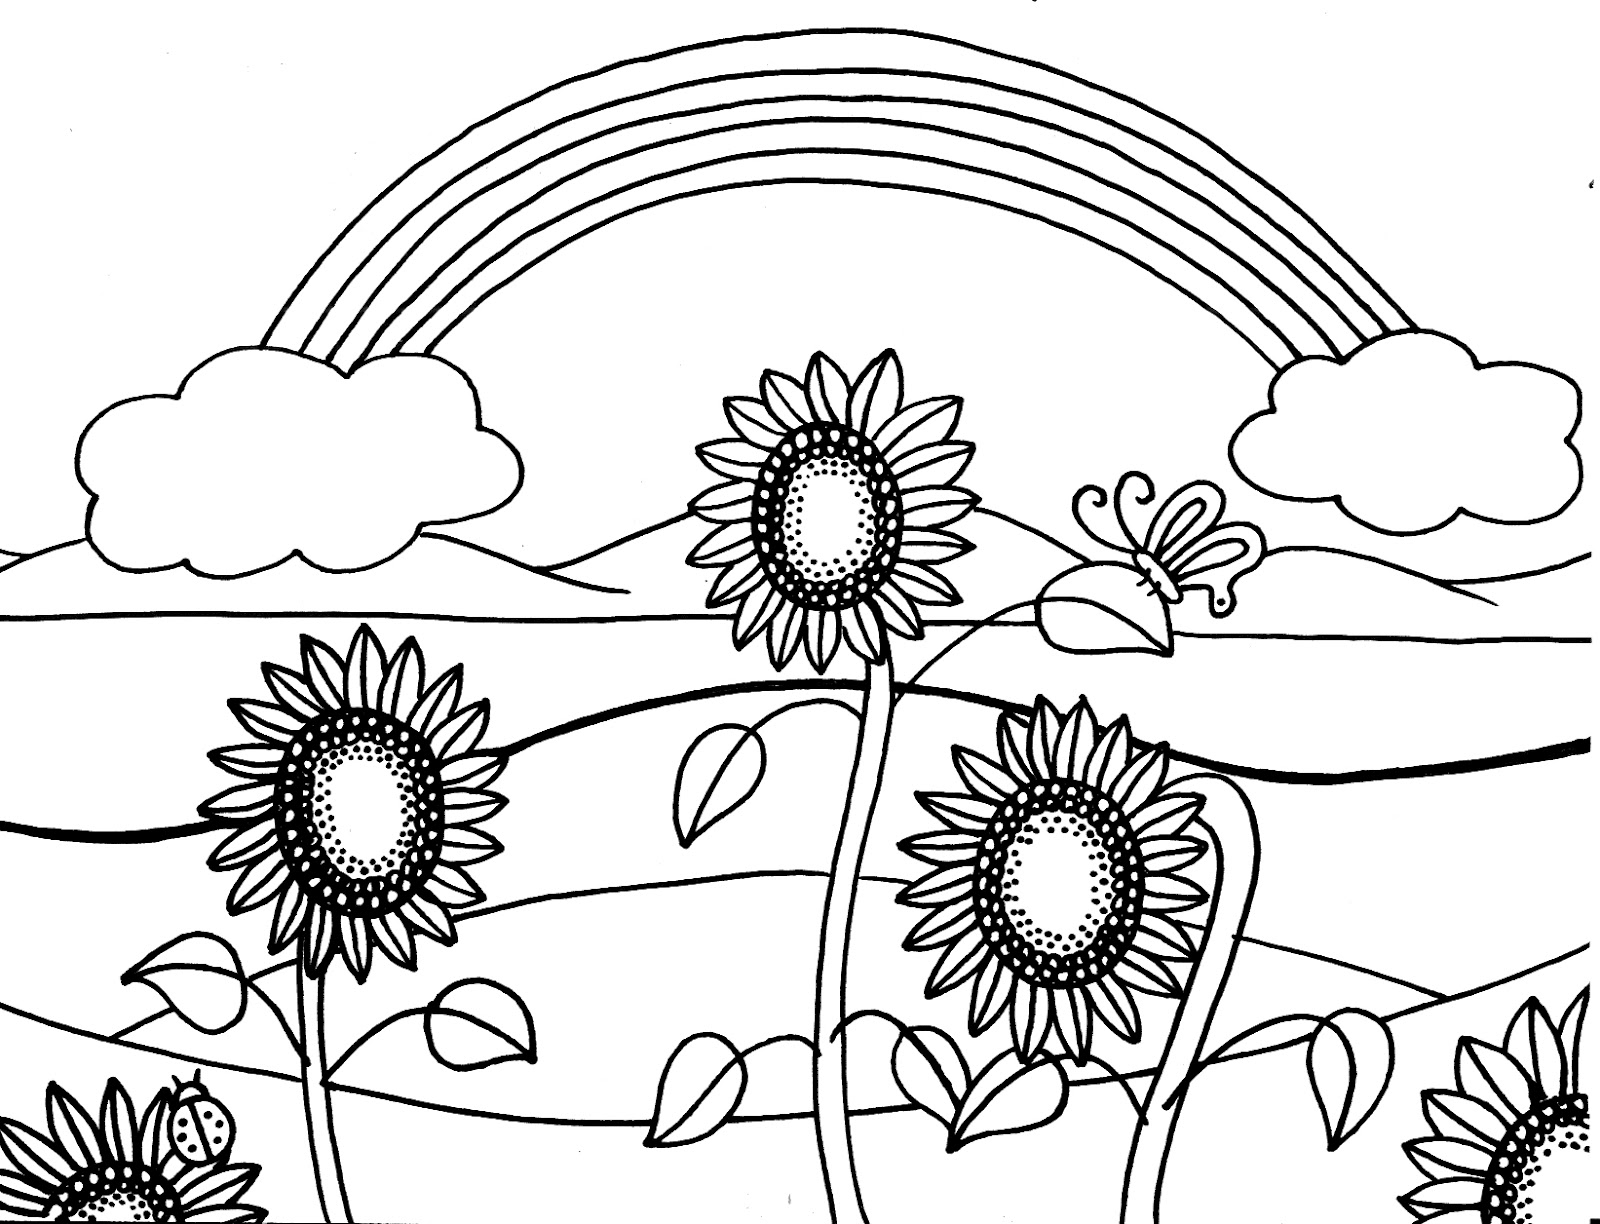 Free coloring pages of van gogh sunflowers